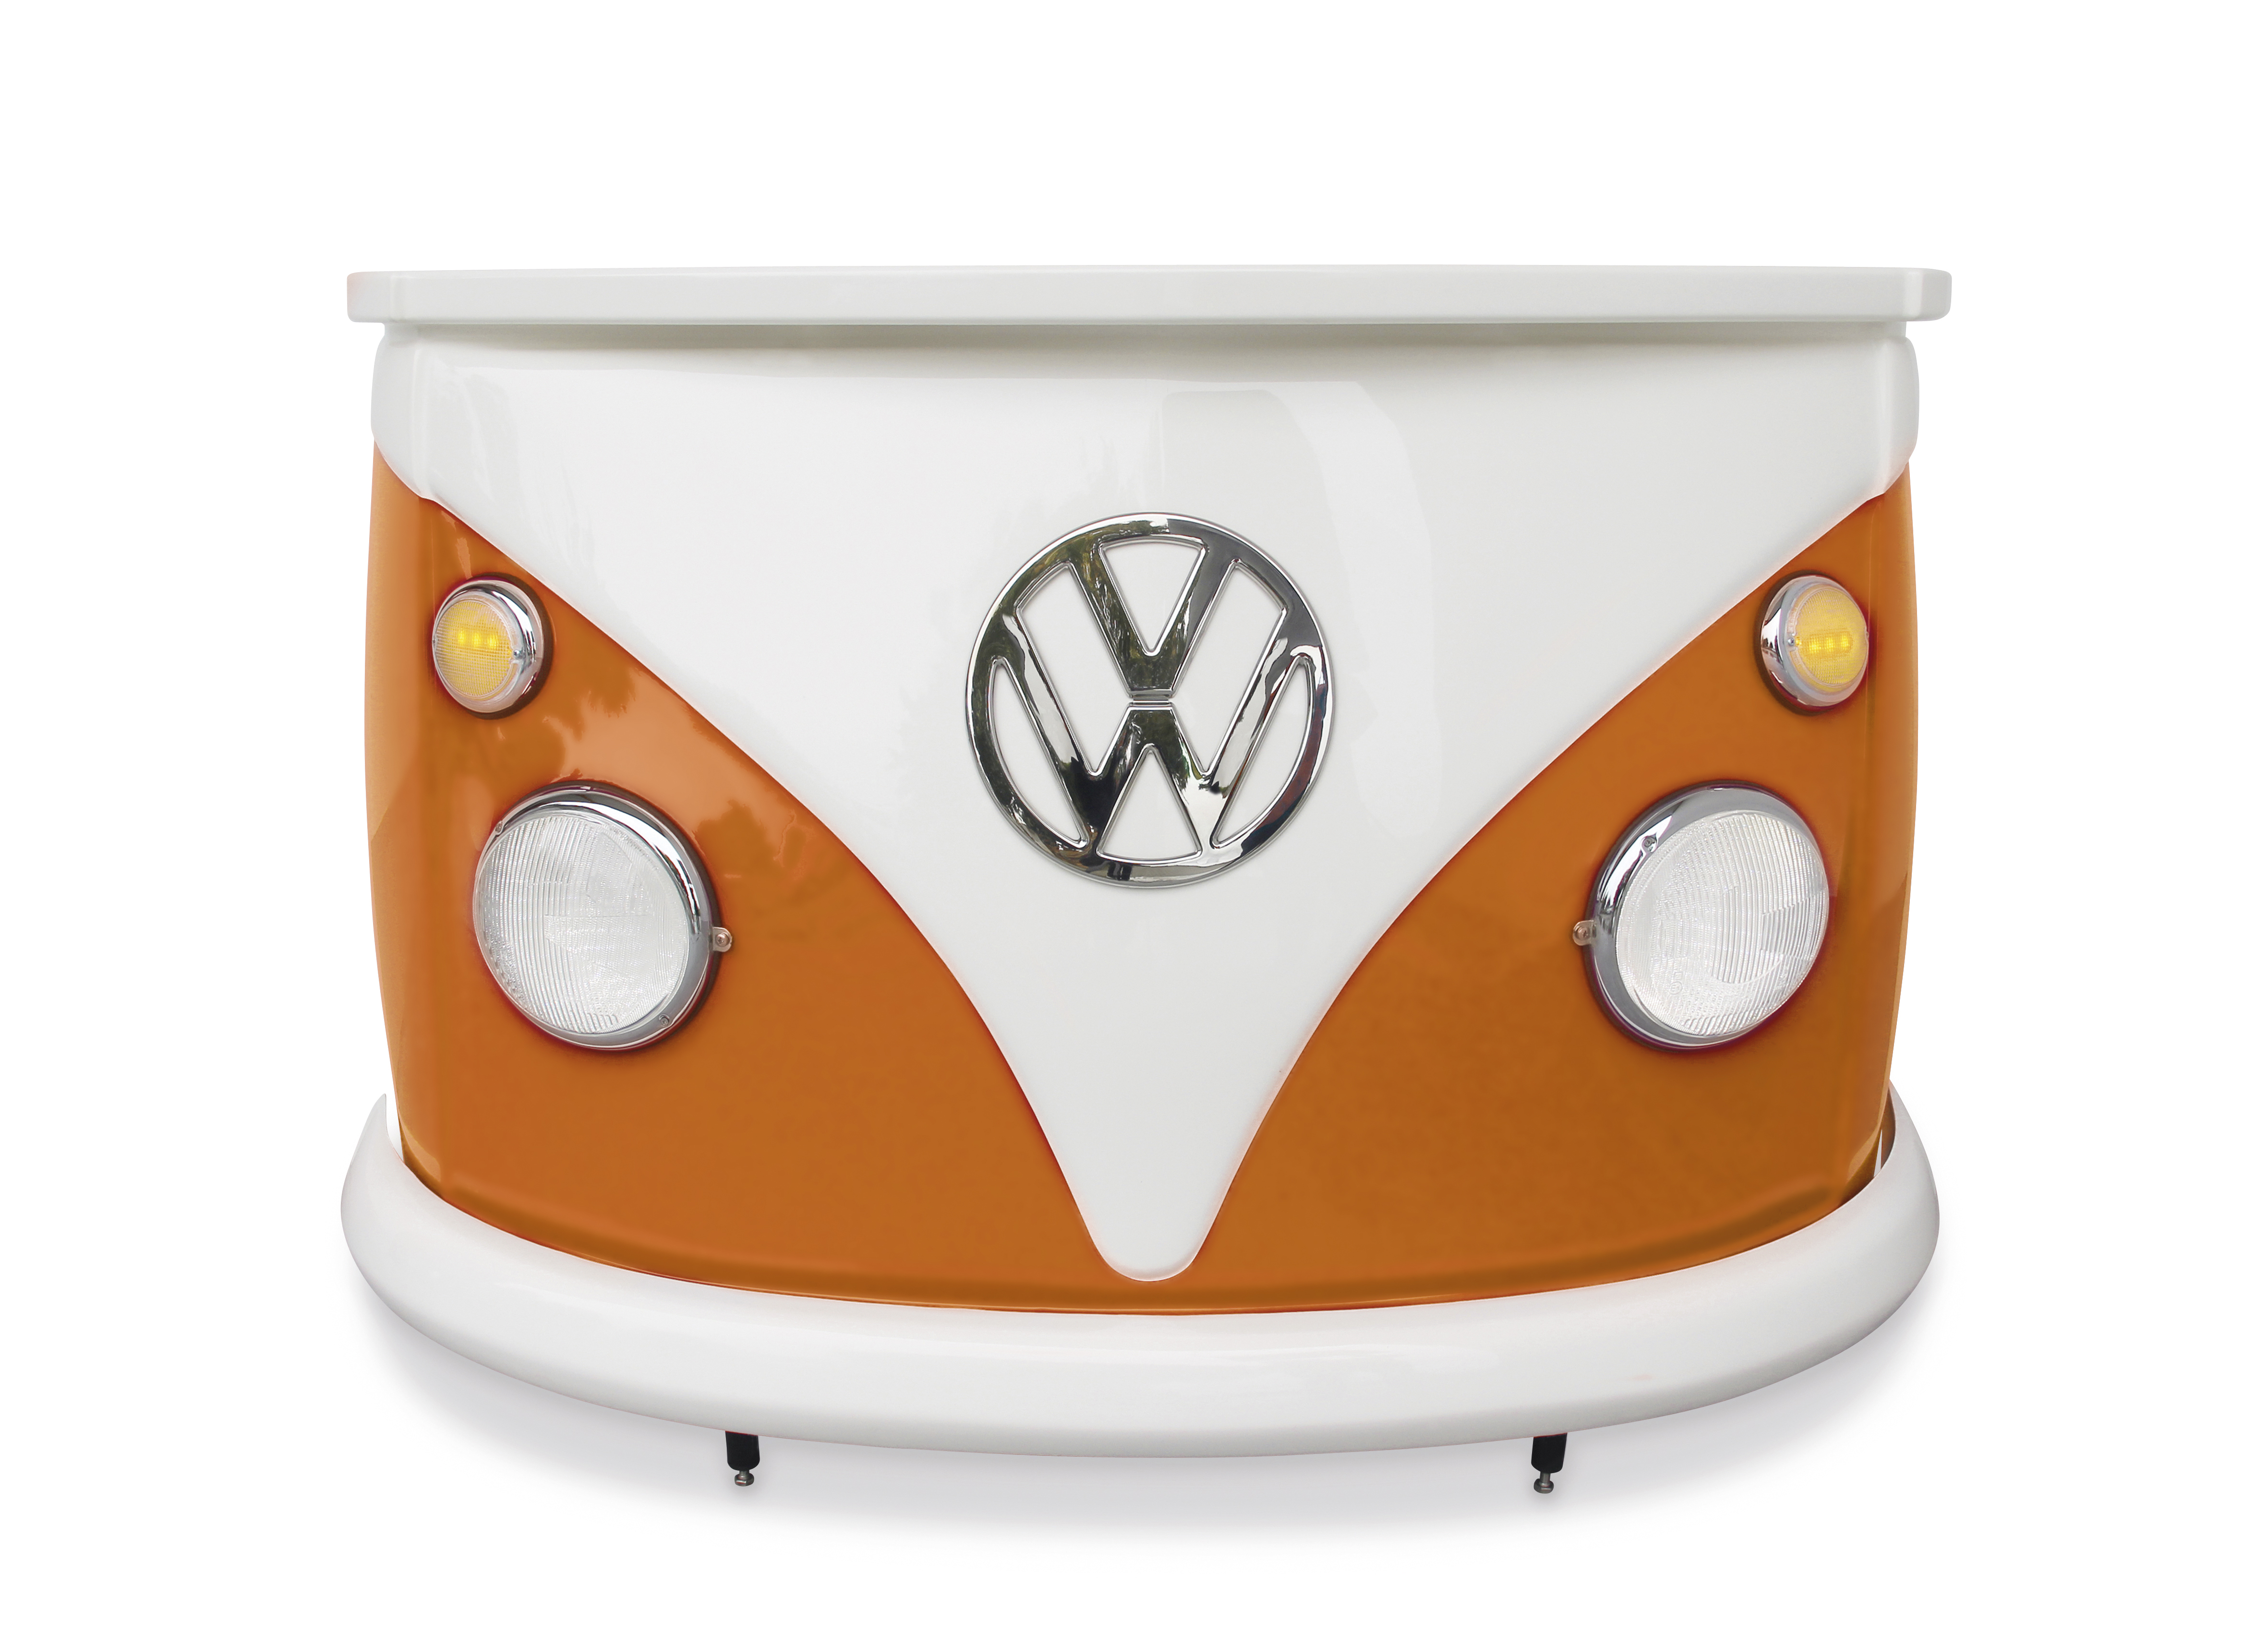 https://vw-collection-by-brisa.com/media/1f/b3/52/1660117527/BUT1BAR_RAL2003%20Pastellorange_front_high_%281%29.jpg